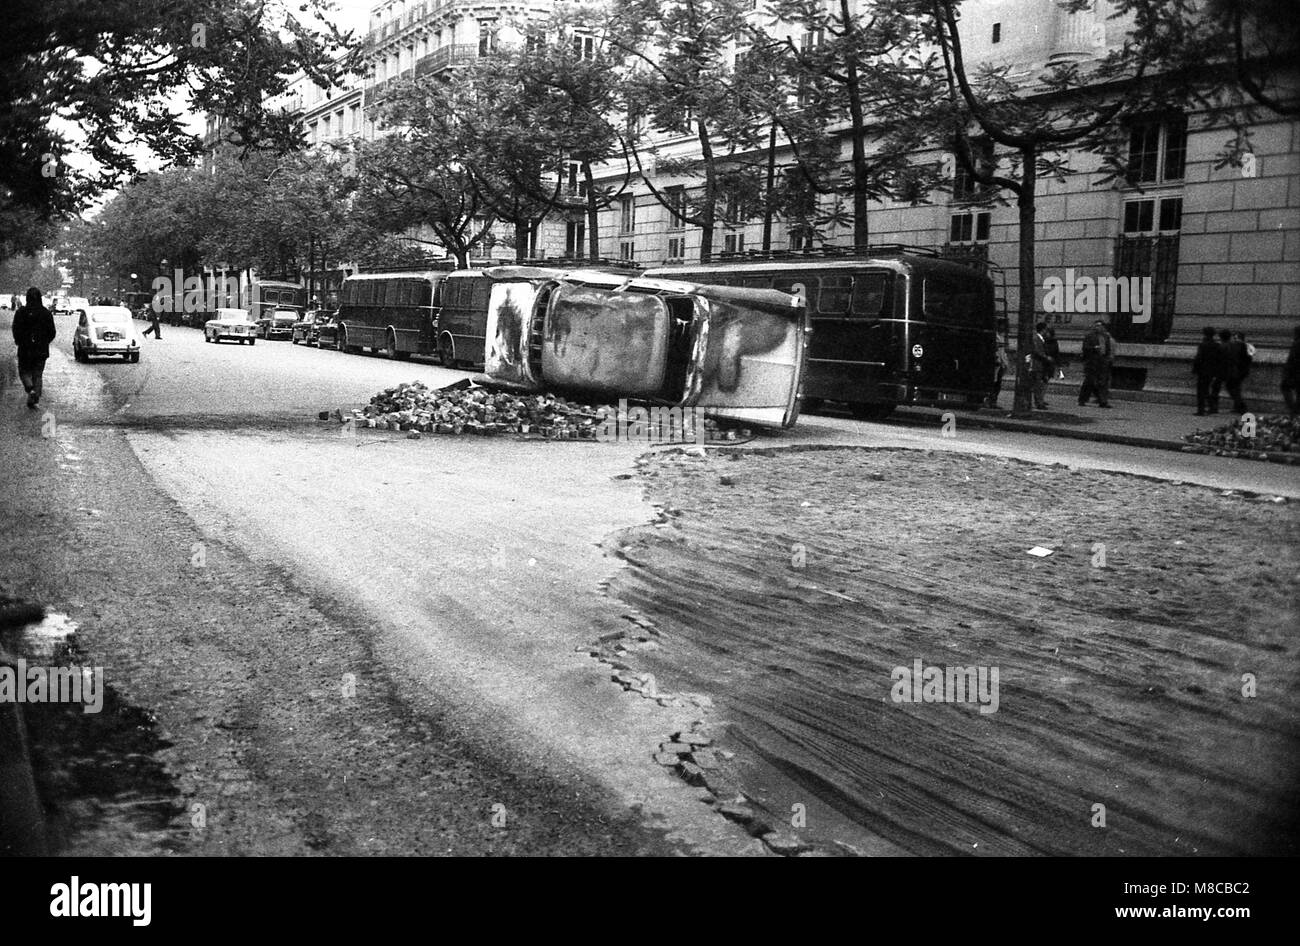 Philippe Gras / Le Pictorium -  May 68 -  1968  -  France / Ile-de-France (region) / Paris  -  The traces of the violent clashes of the day before Stock Photo